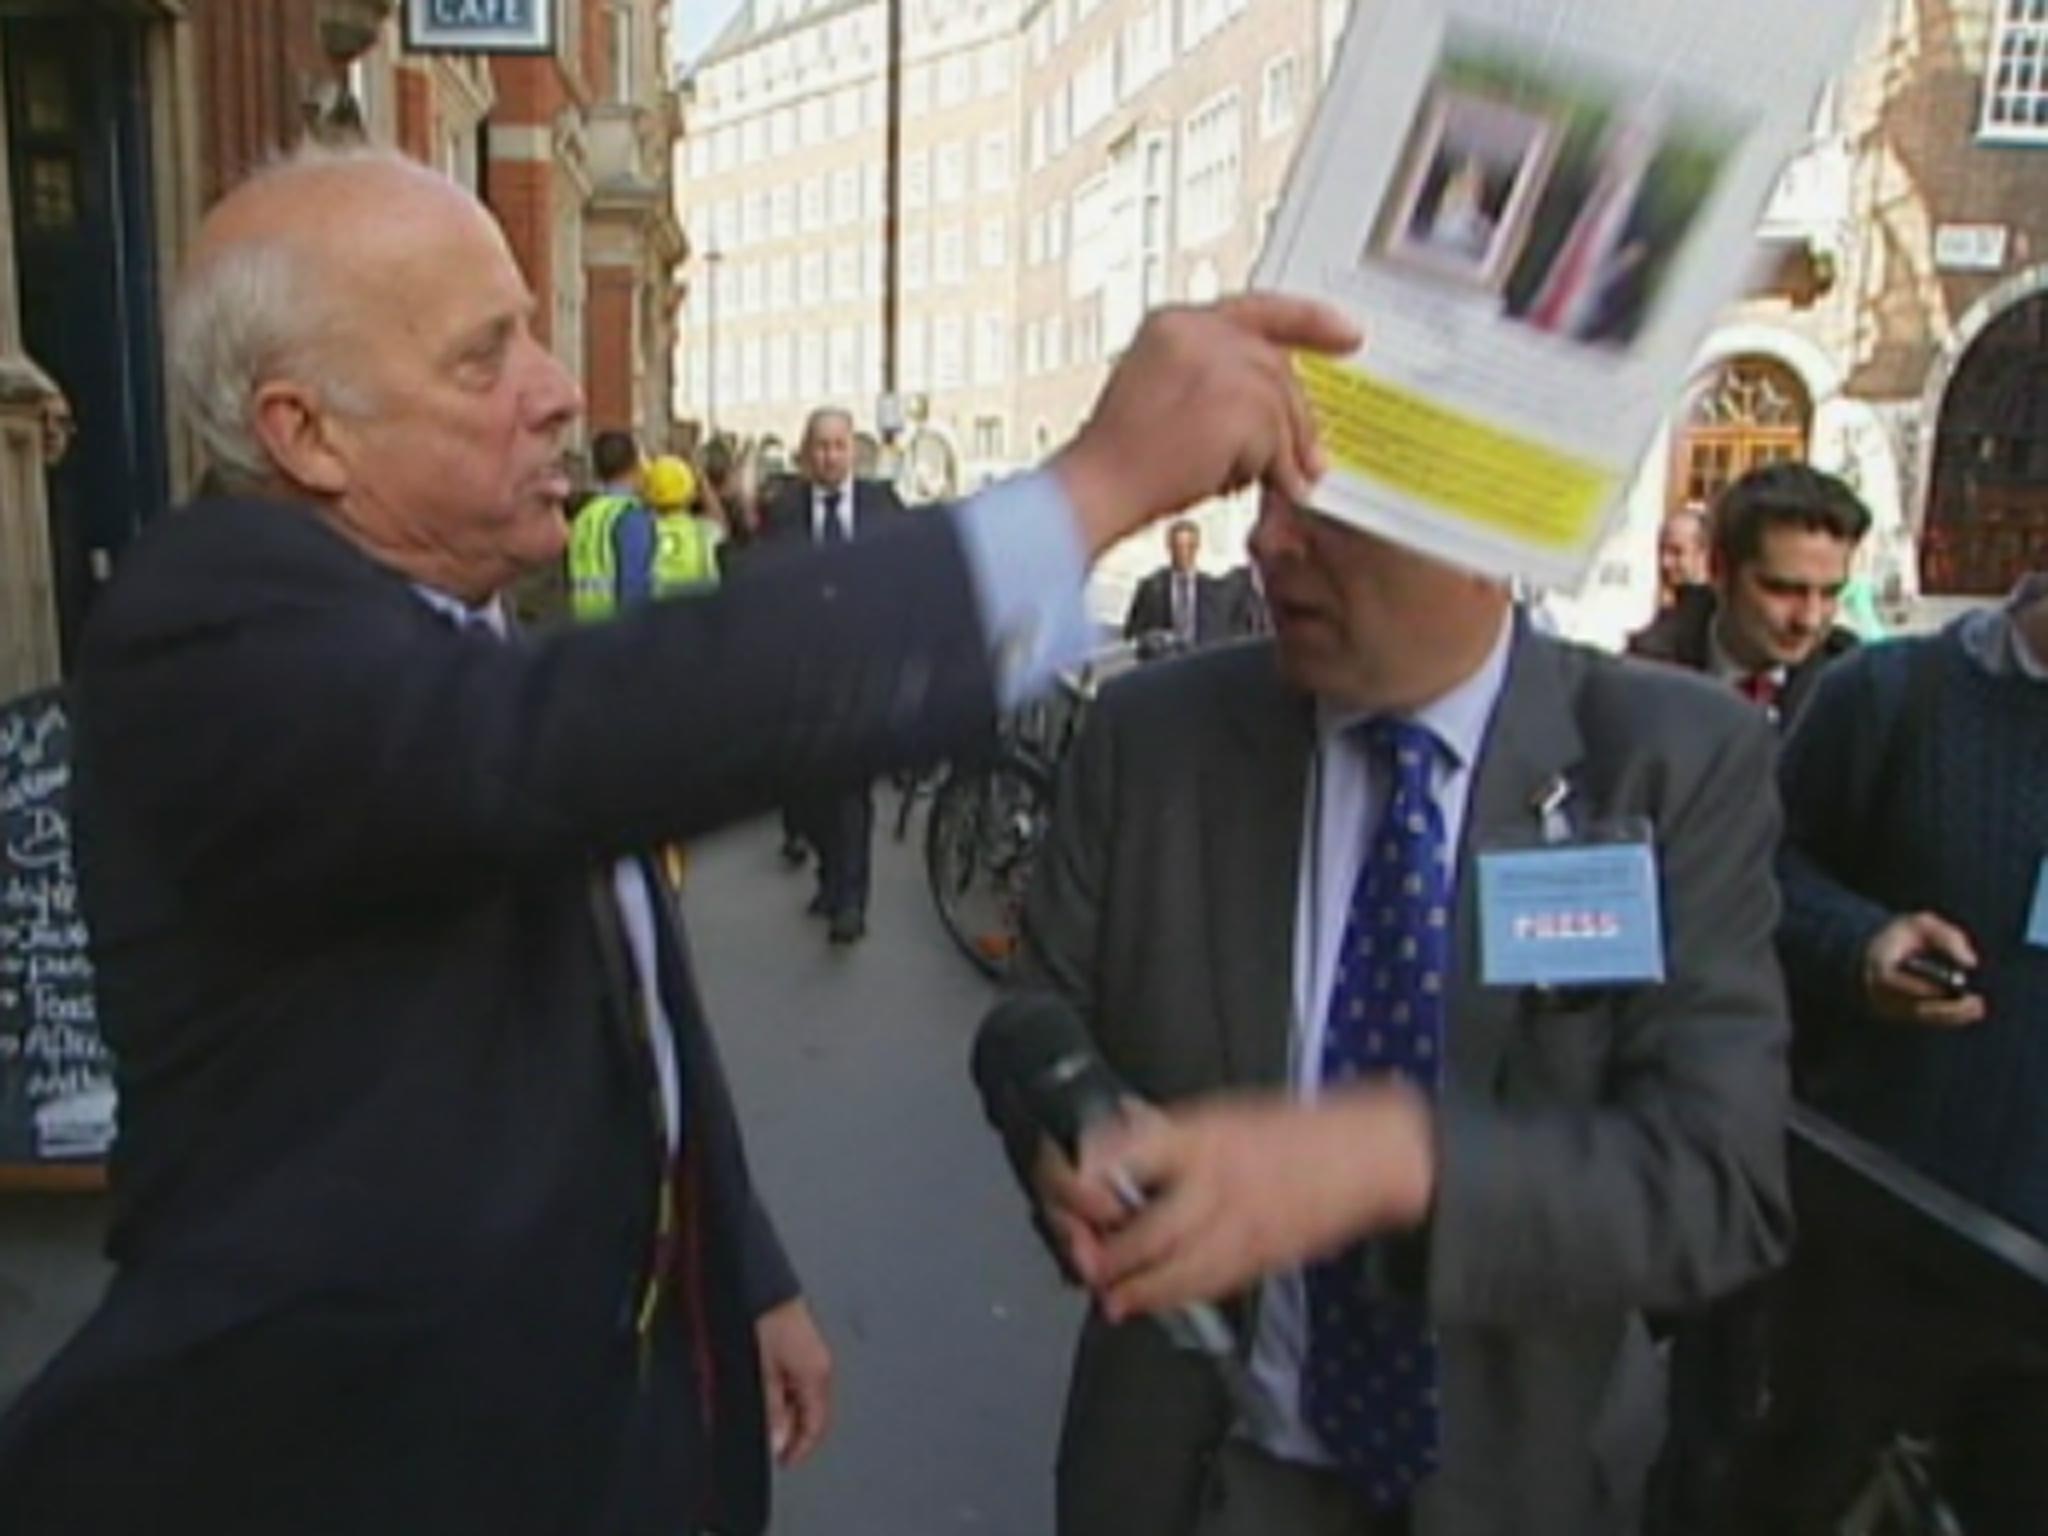 Bloom branded Crick 'disgraceful' before hitting him over the head with the brochure and throwing it to the floor